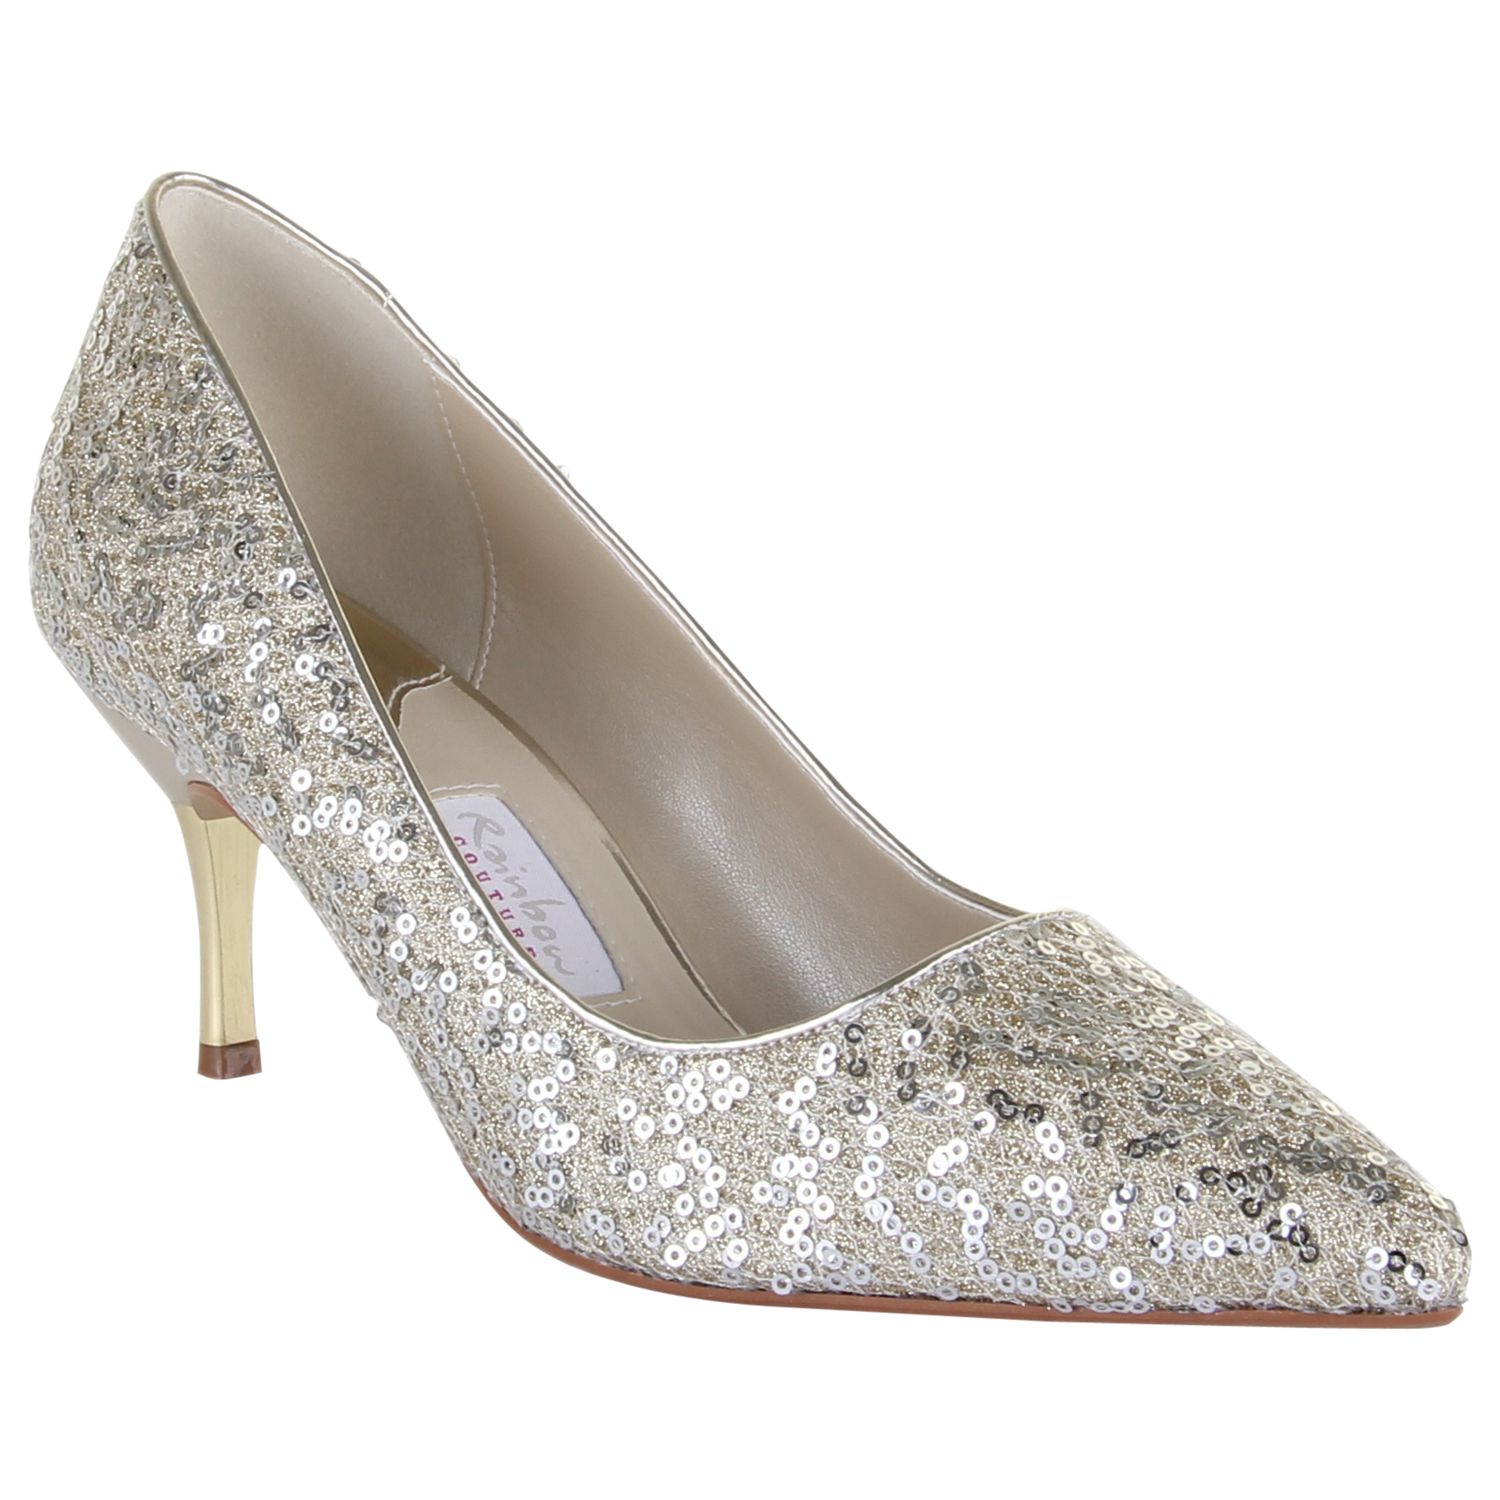 Rainbow Couture Vita Glitter Covered Court Shoes, Silver at John Lewis